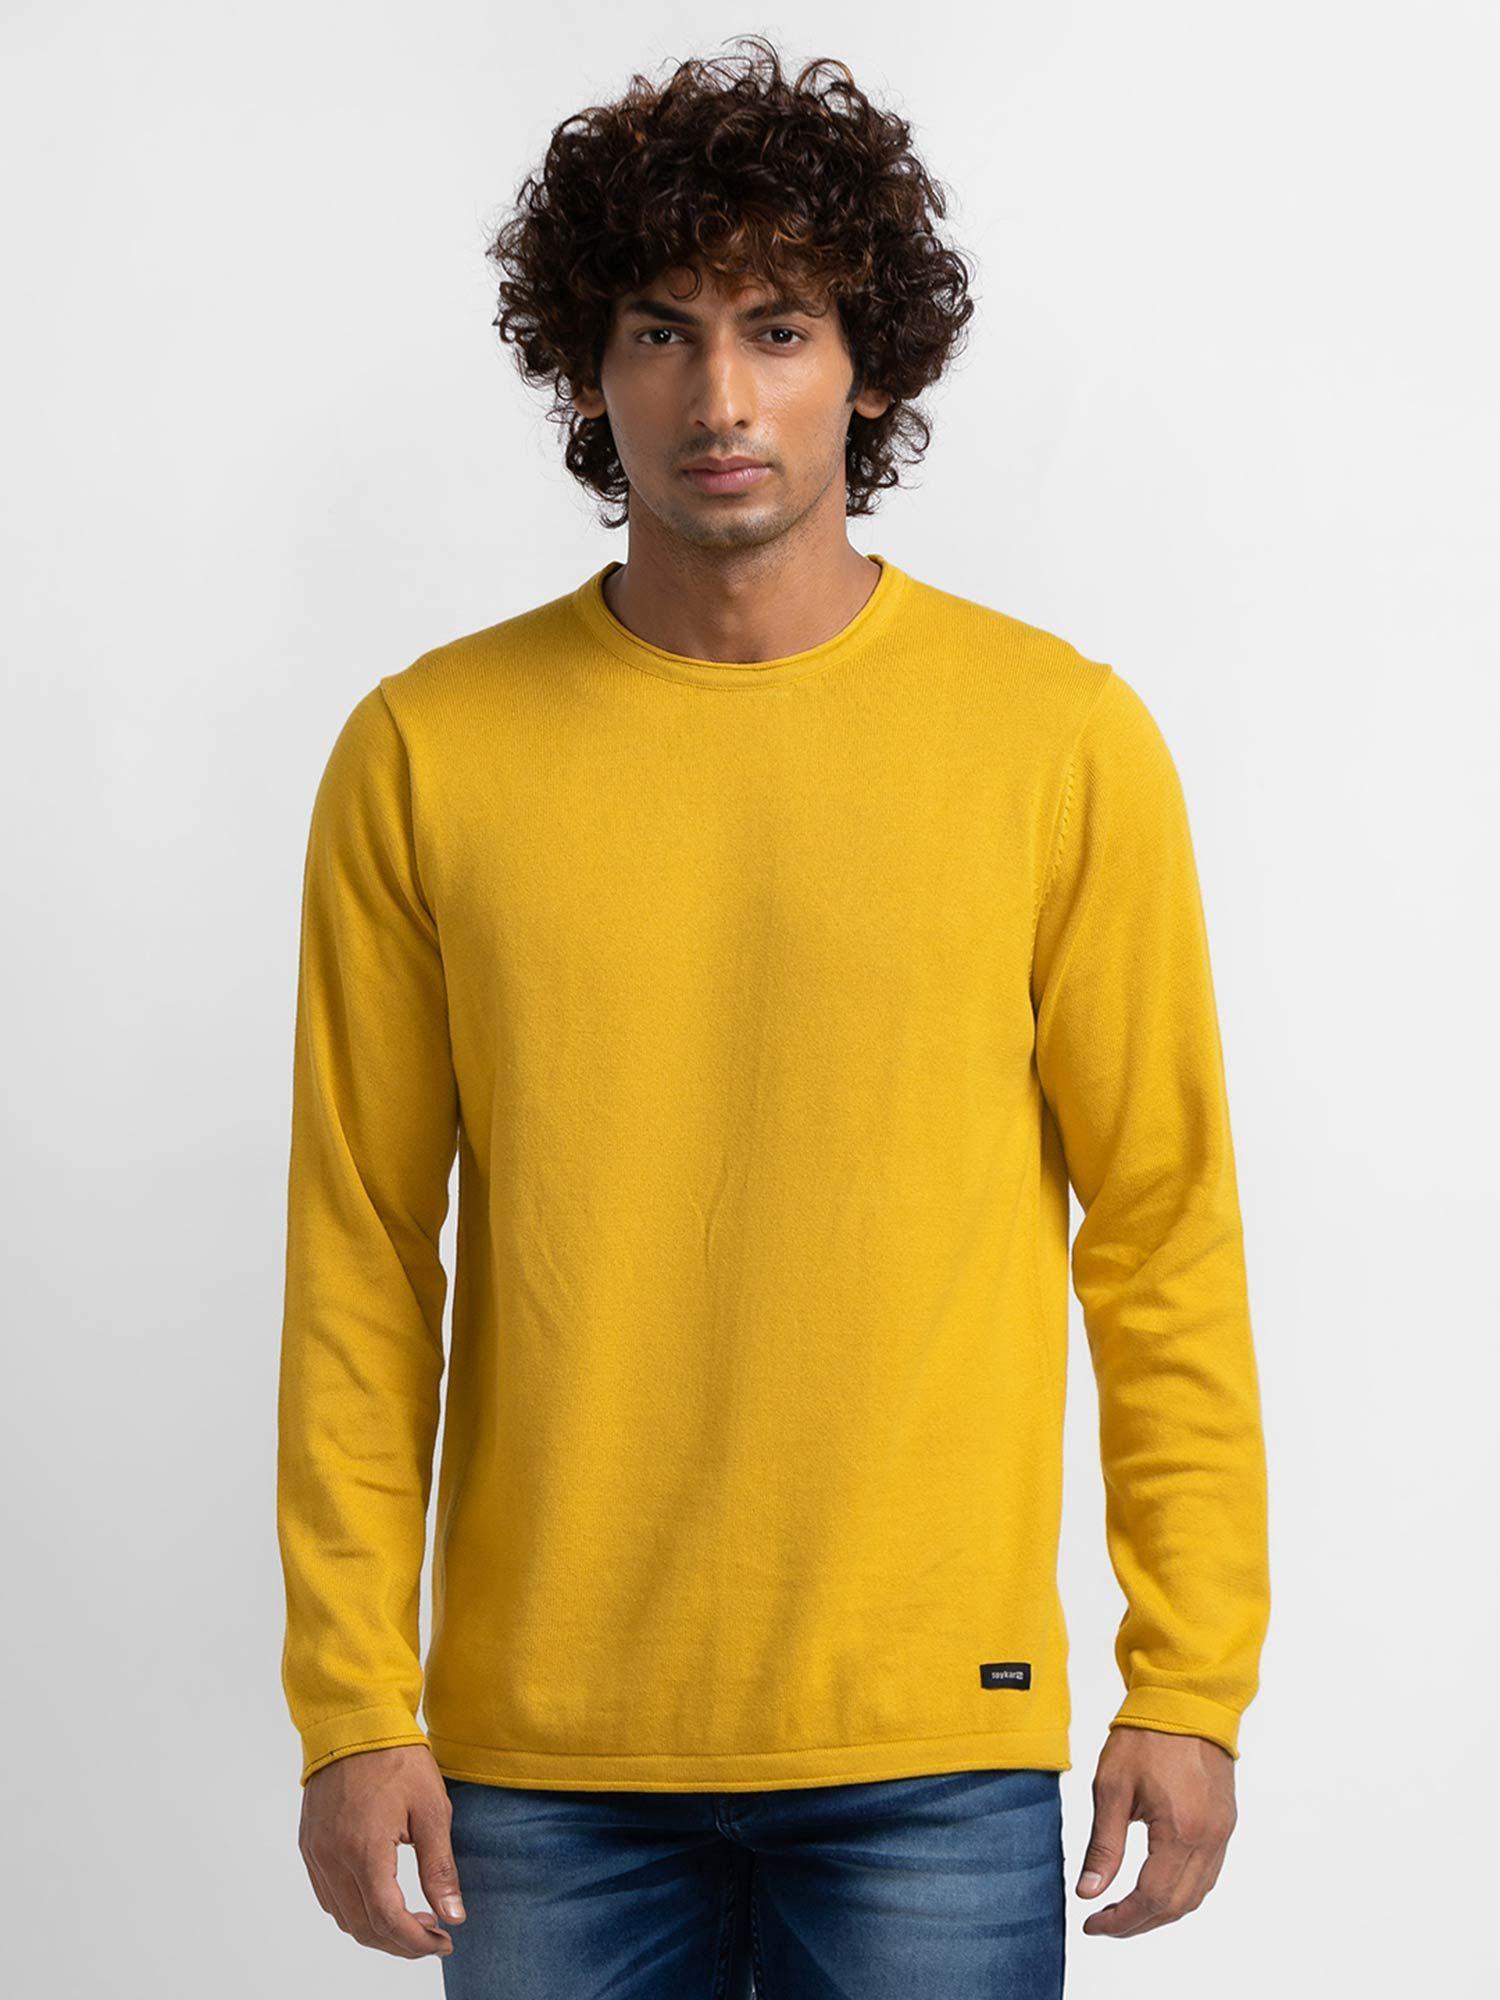 sulphur-yellow-cotton-full-sleeve-casual-sweater-for-men